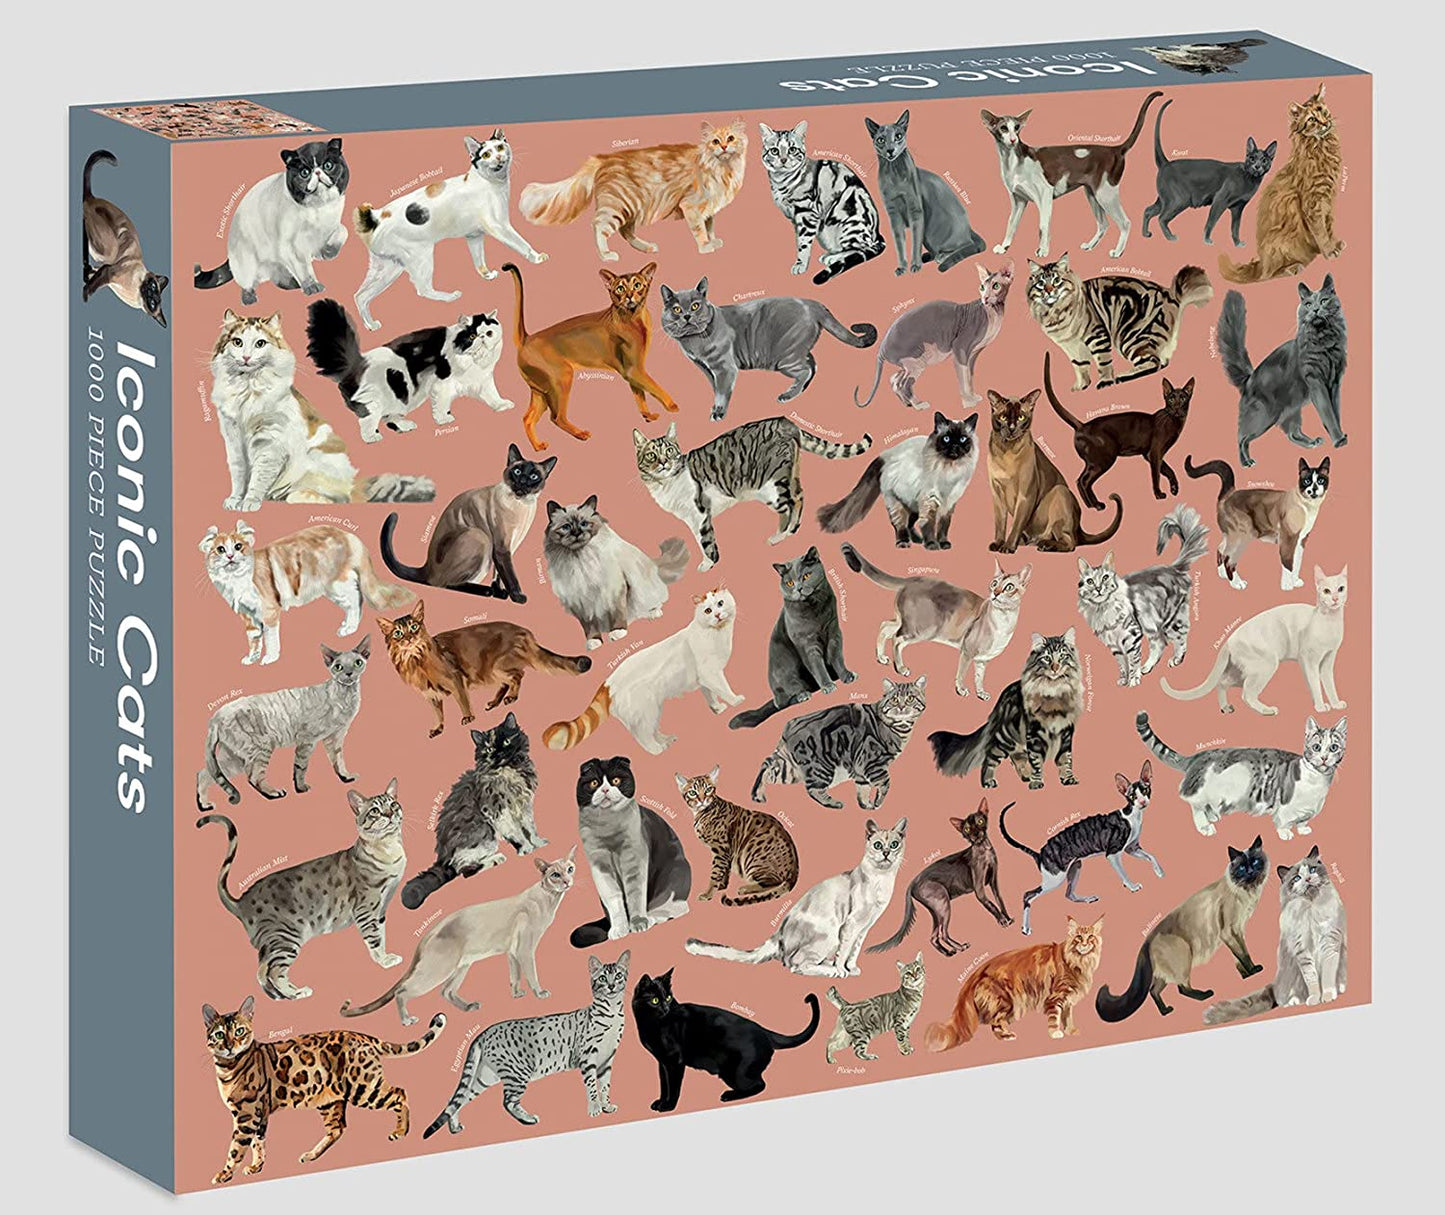 Iconic Cats 1000 Piece Jigsaw Puzzle